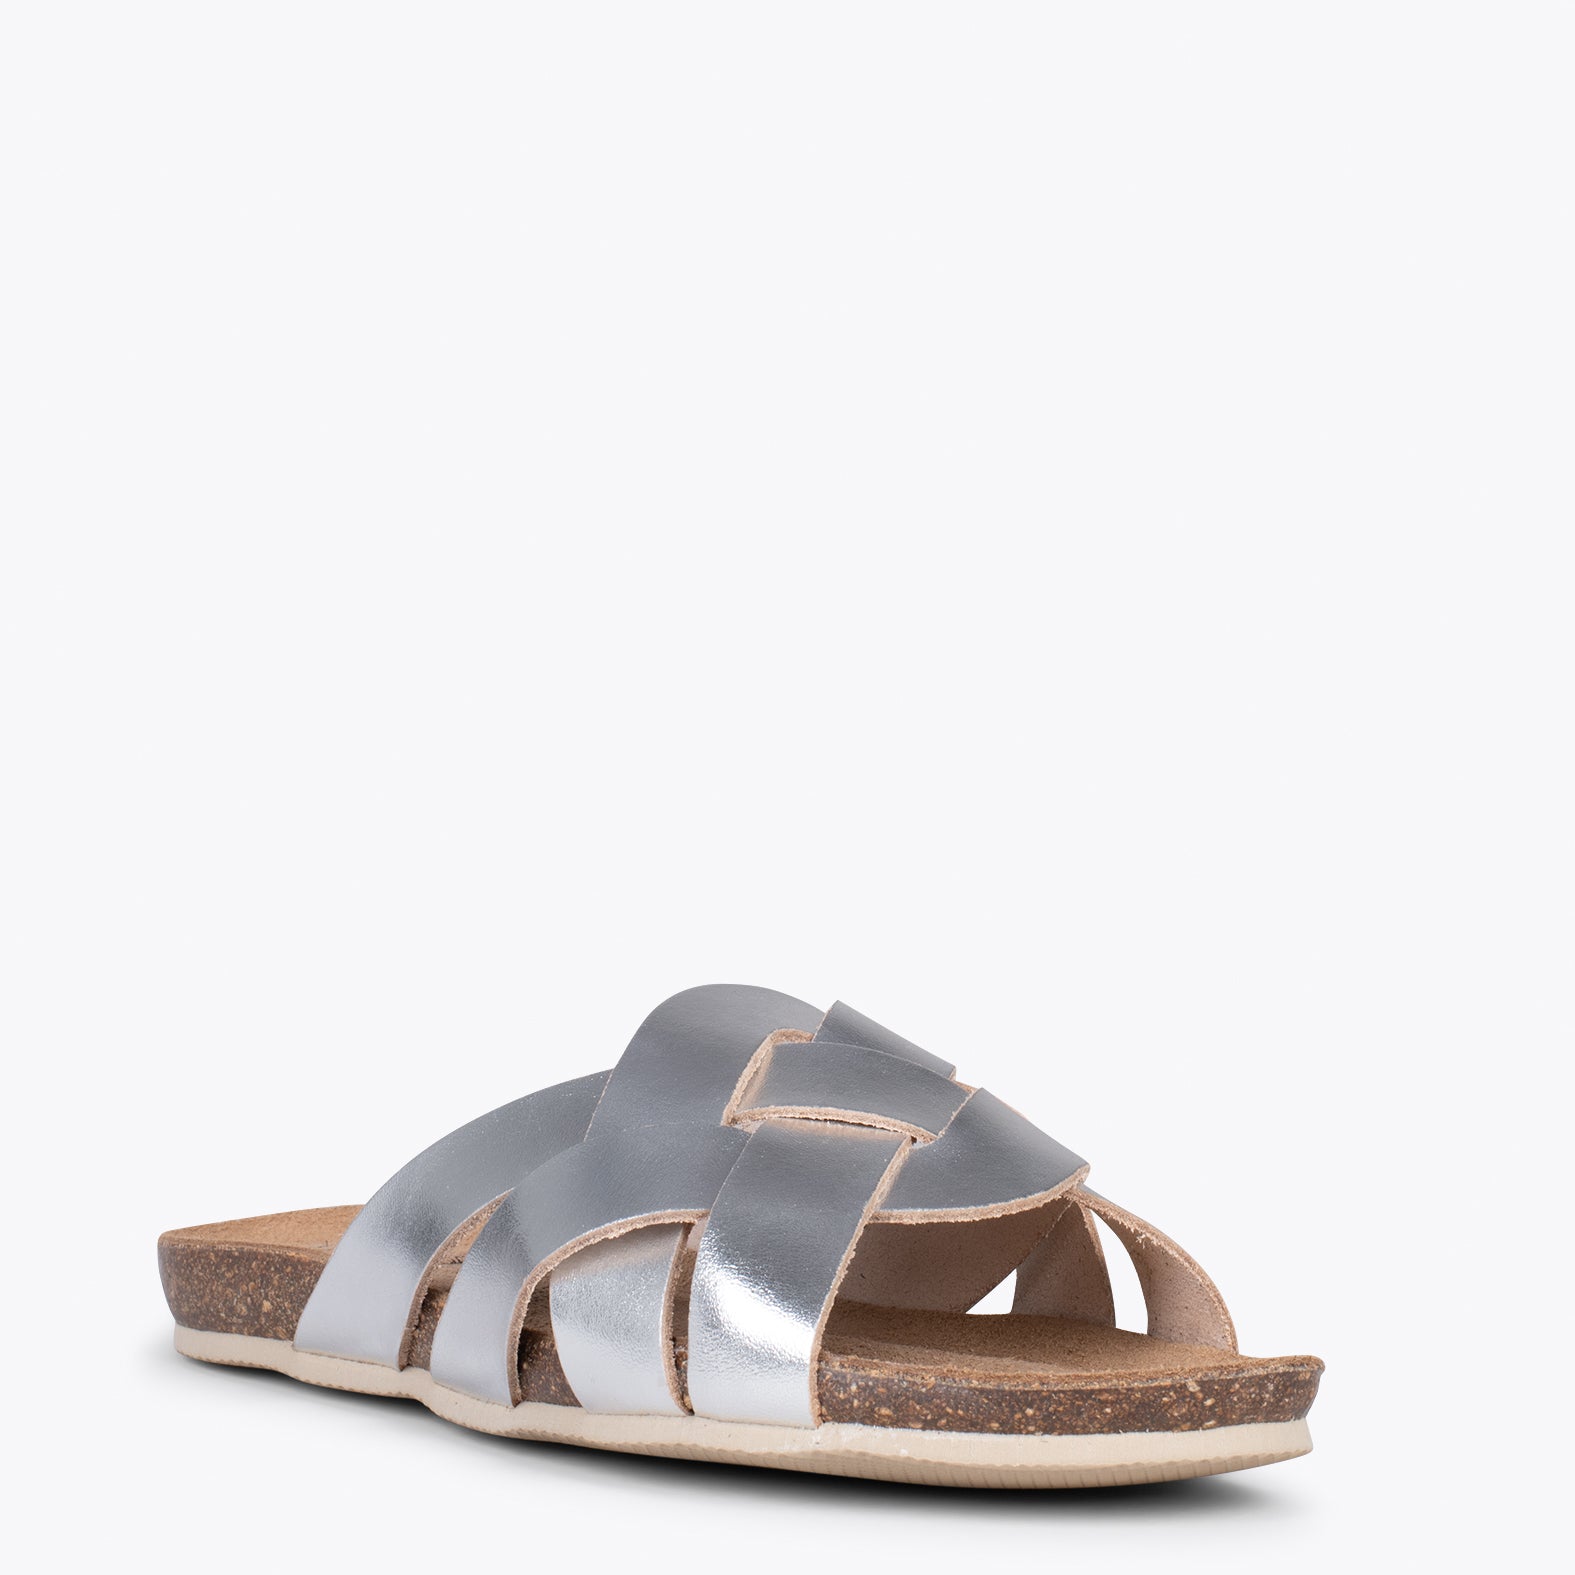 DHALIA – SILVER slides with braided upper